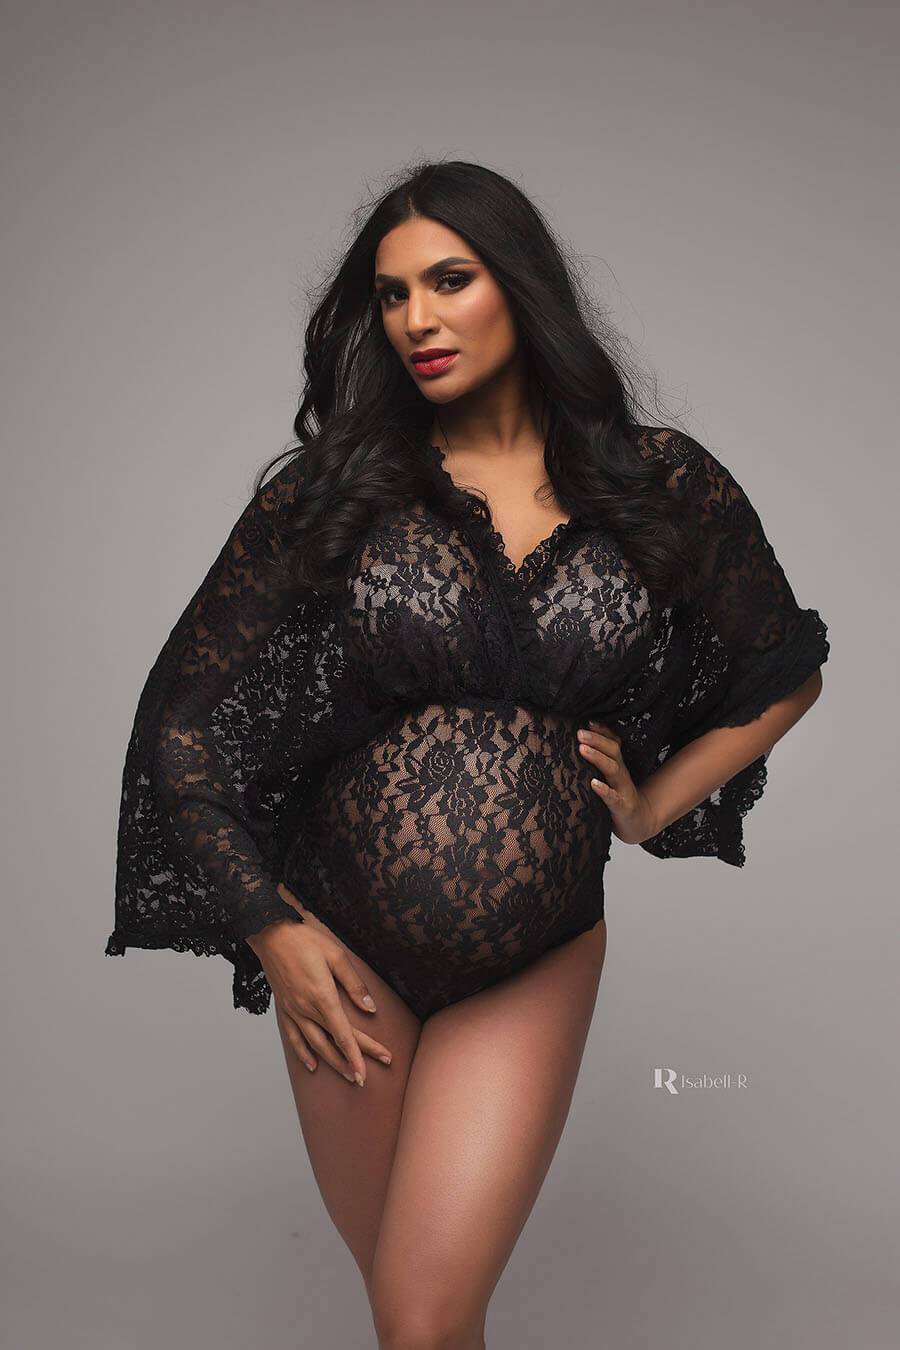 A pregnant woman is wearing a black lace bodysuit, The top is boho styled and see trough. She is wearing her own bra underneath